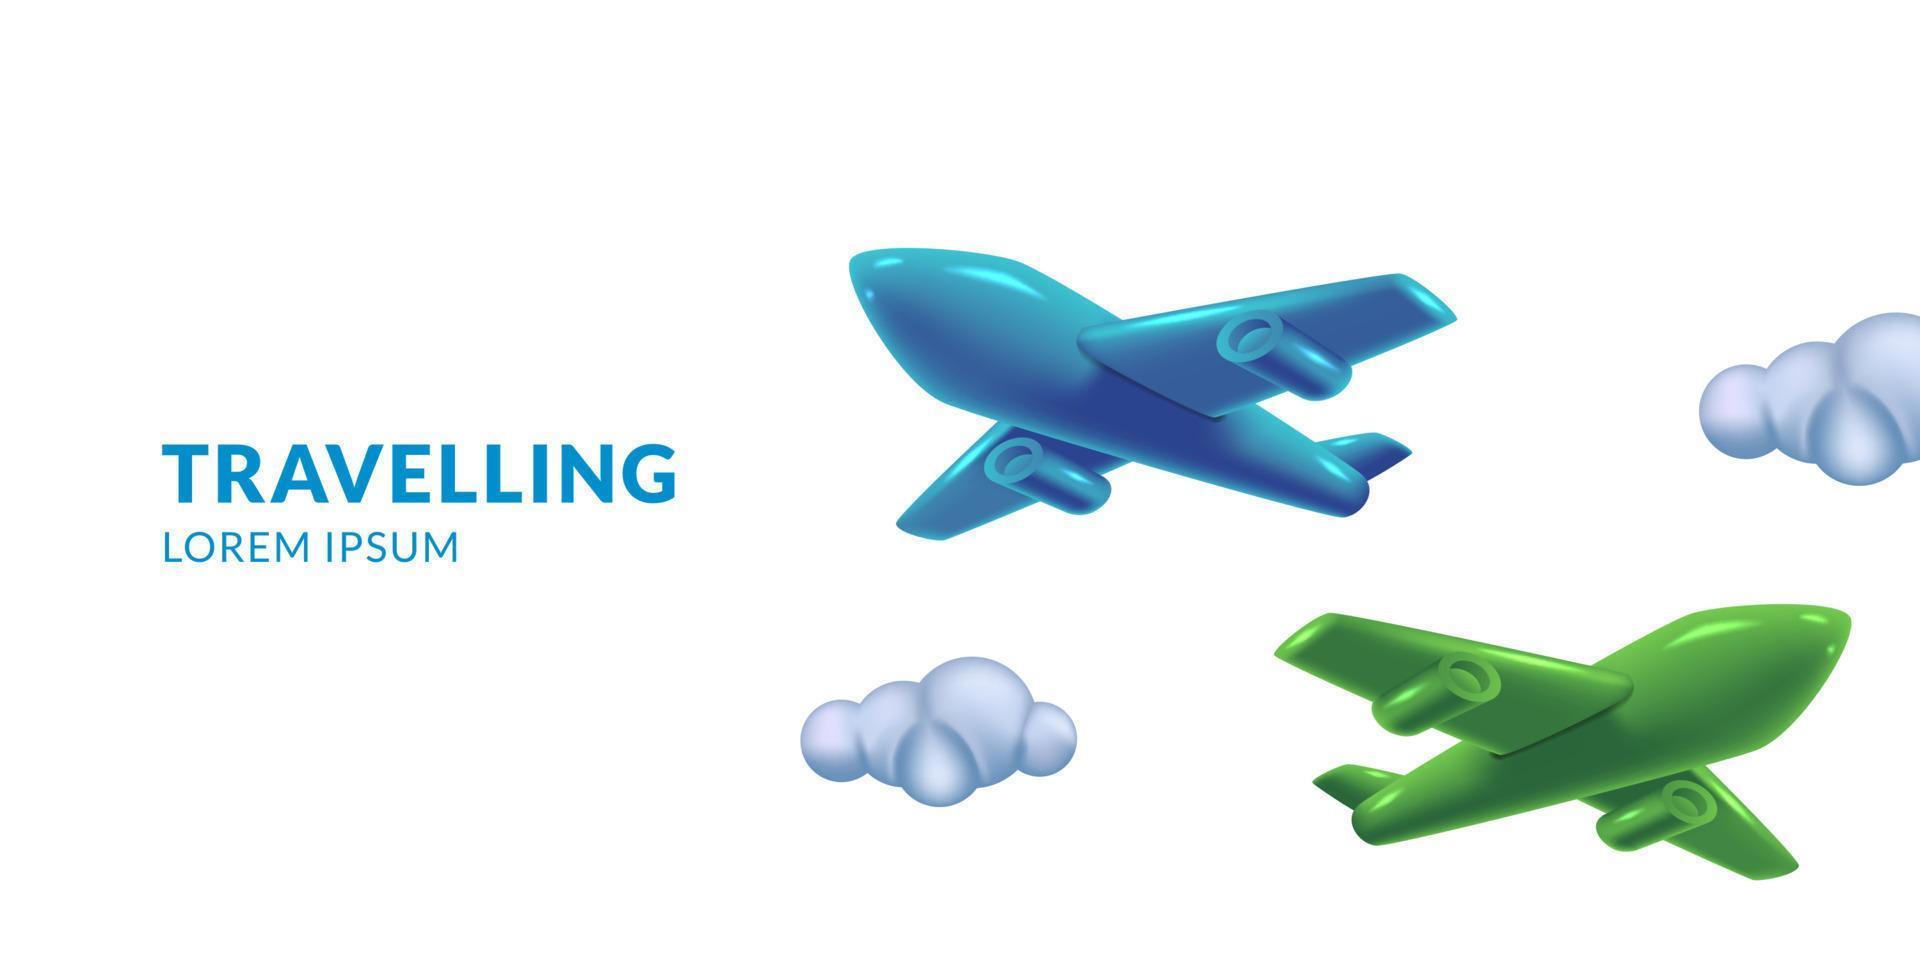 traveling around the world concept with 3d cute airplane illustration concept vector